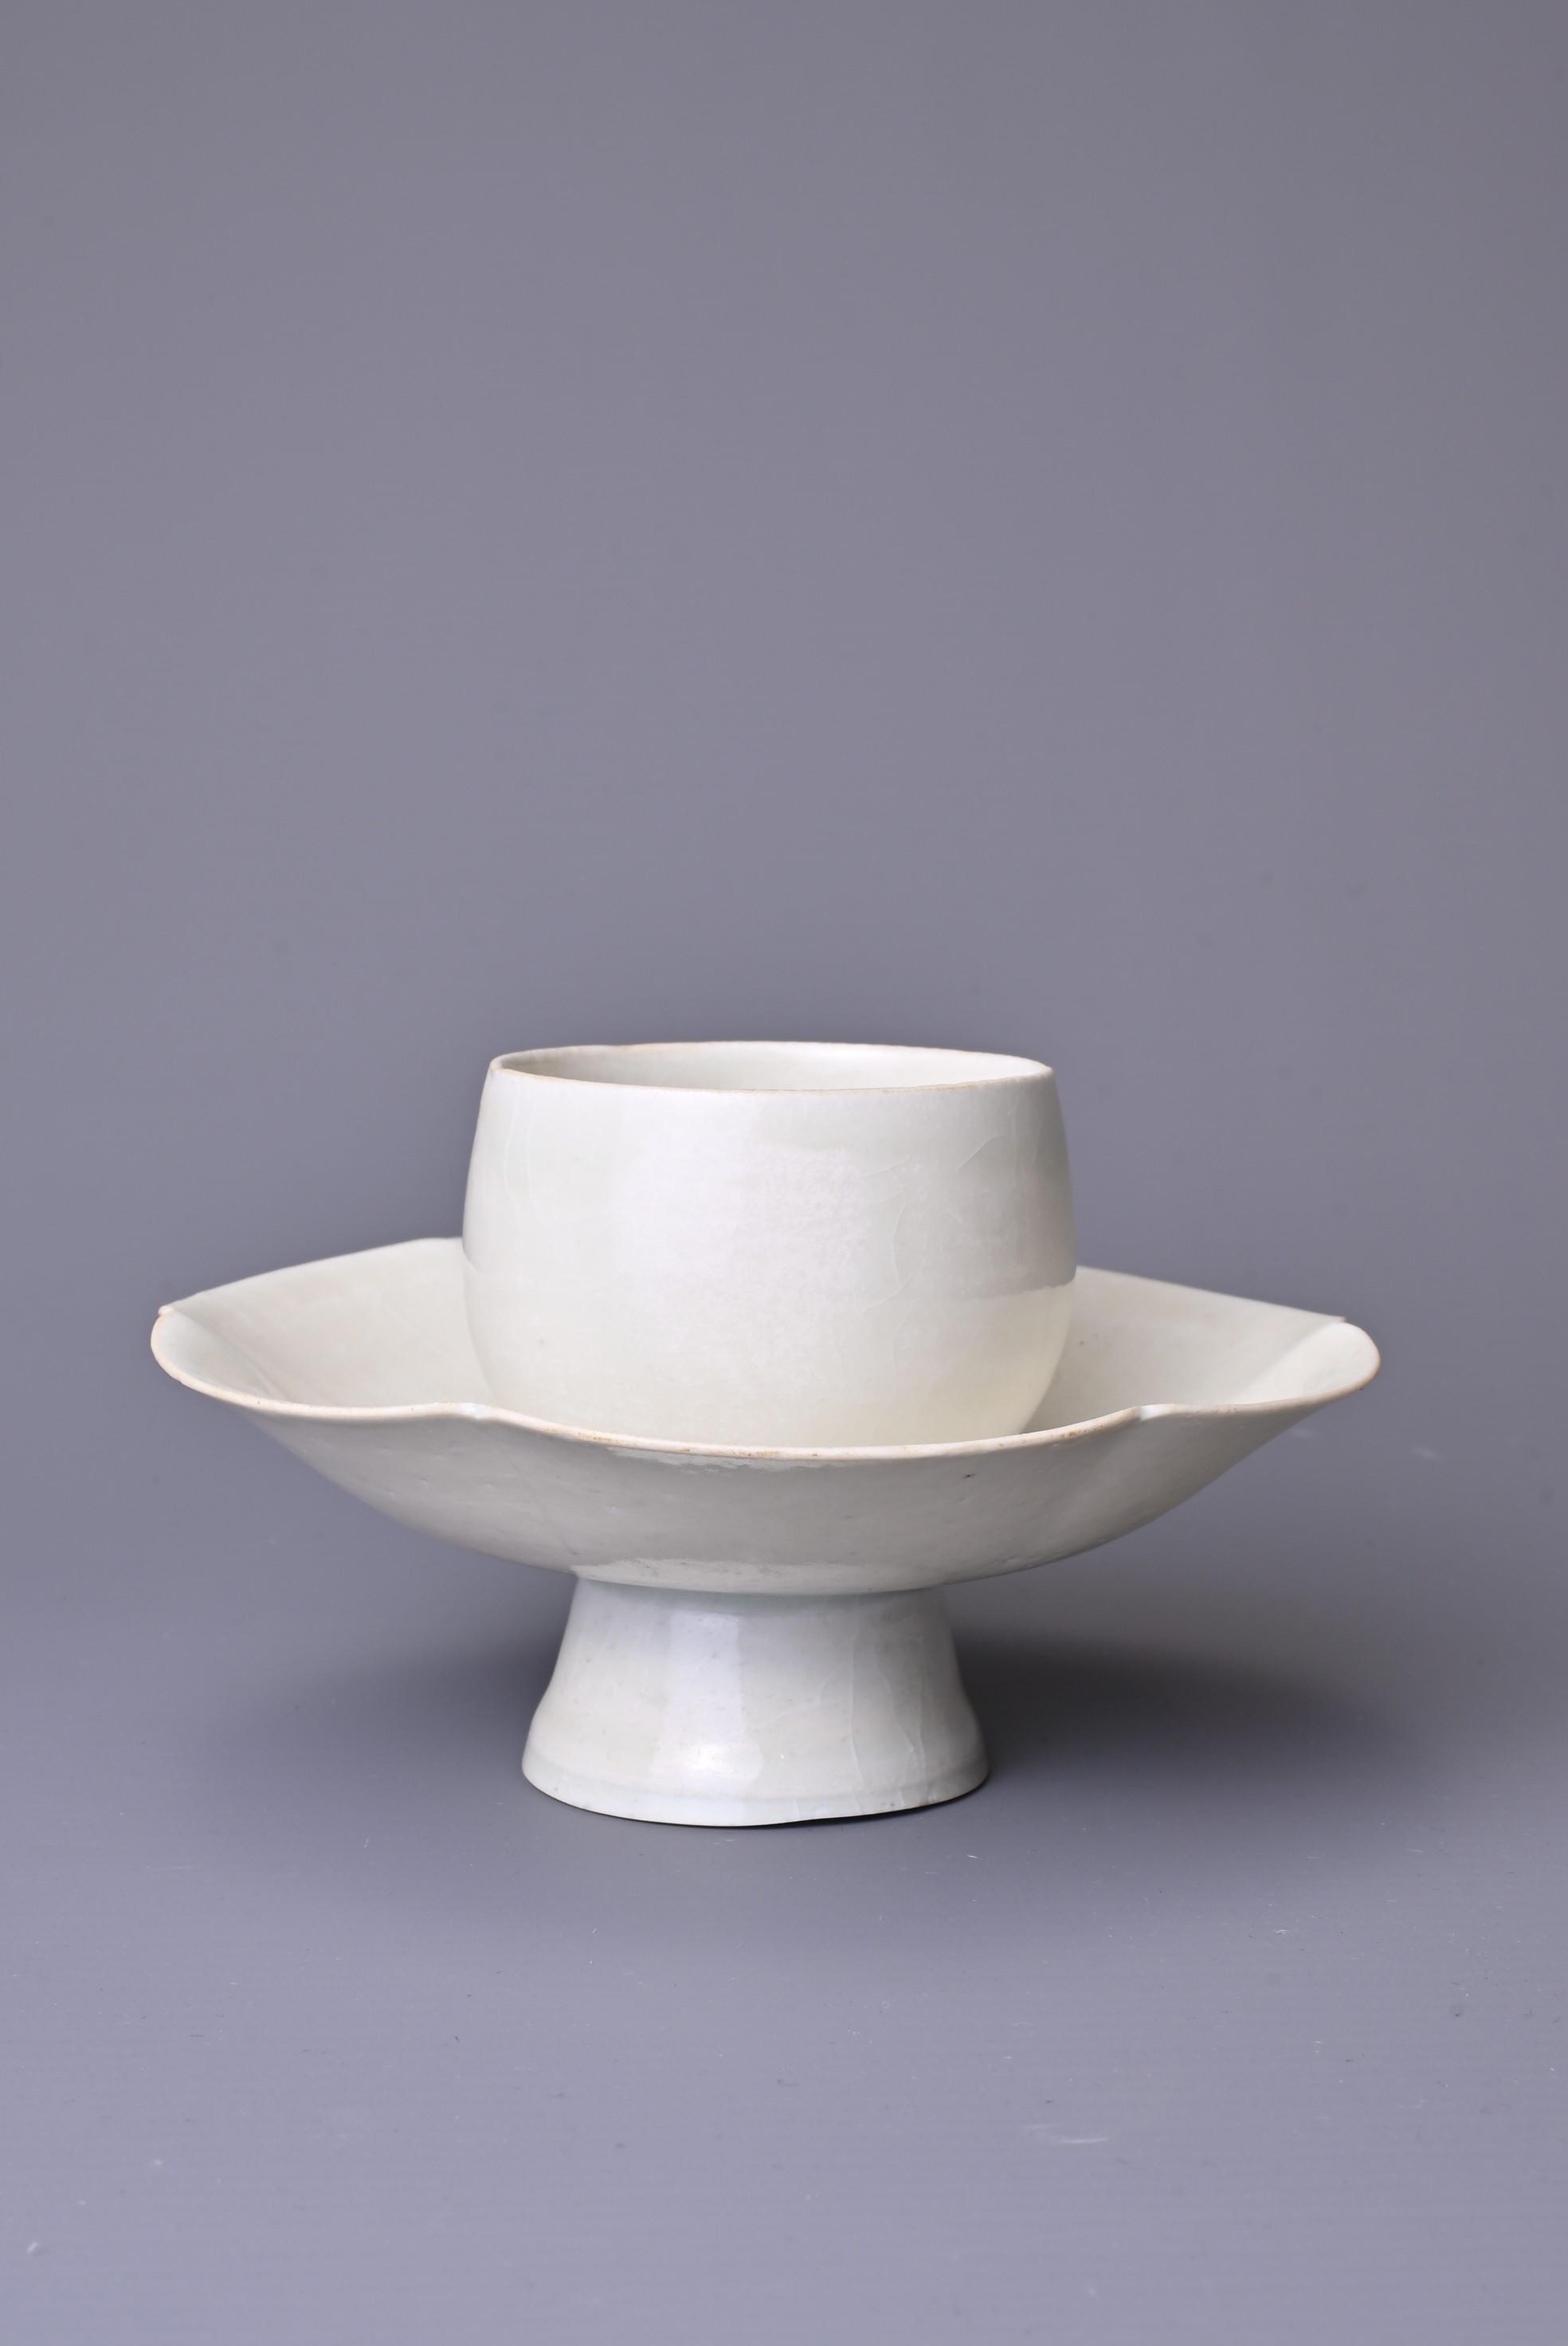 A CHINESE QINGBAI WARE CUP STAND, SONG DYNASTY (960-1279). A rounded cup top section attached to a - Image 2 of 6